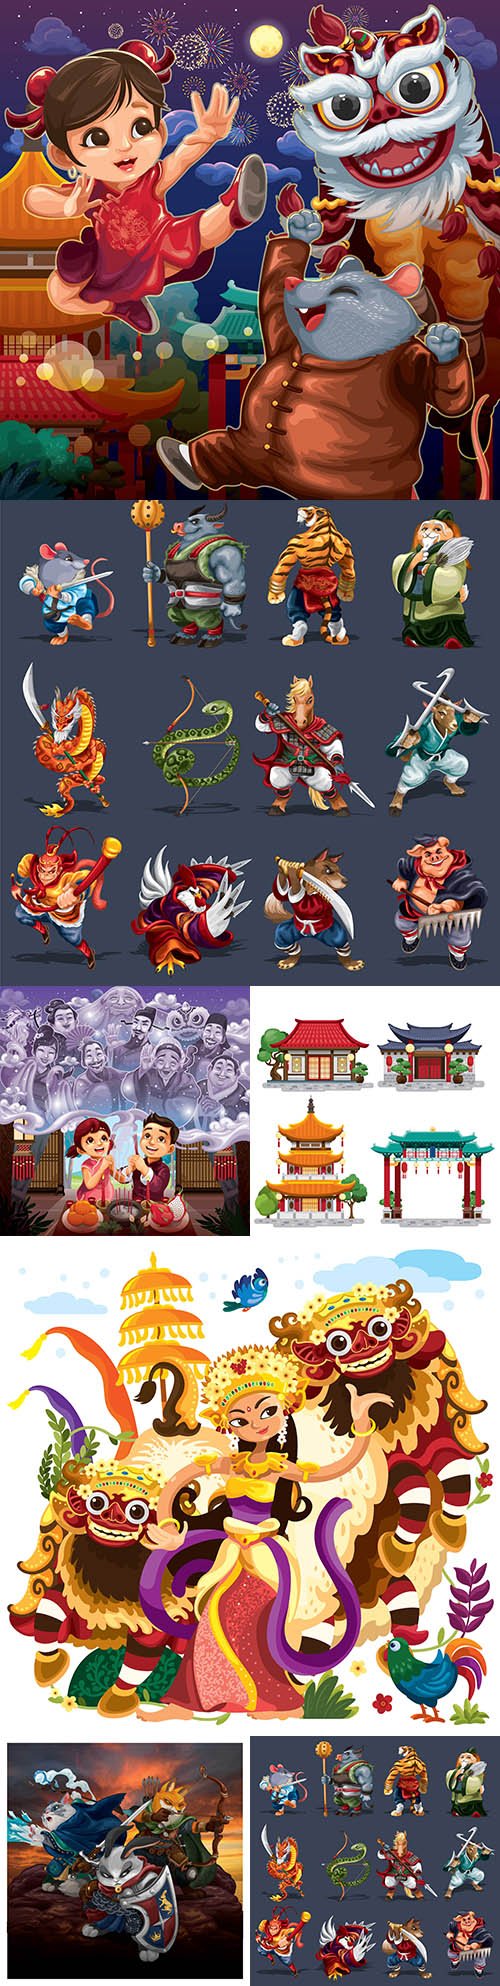 Chinese culture and tradition dsign illustration